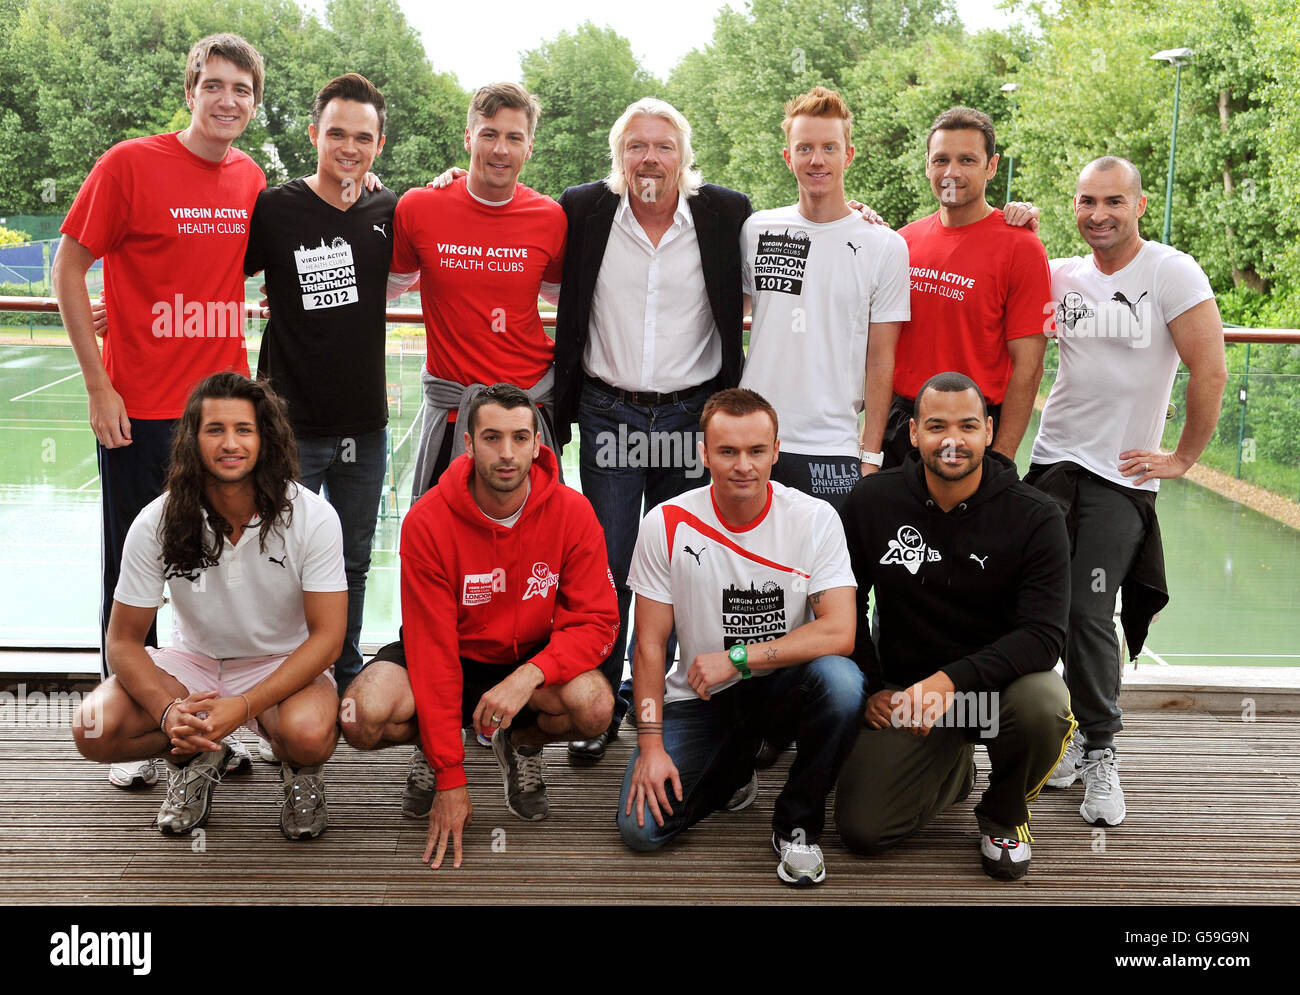 Sir Richard Branson (top row centre) at the Virgin Active health club in Chiswick south west London, with (top row left to right) Oliver Phelps, Gareth Gates, Jon Lee, James Barr, Mark Ramprakash, and Louie Spence (bottom row left to right) and Ollie Locke, Toby Anstis, Matt Evers and Michael Underwood who will all take part in the Virgin Active London Triathlon on 22nd-23rd September. Stock Photo